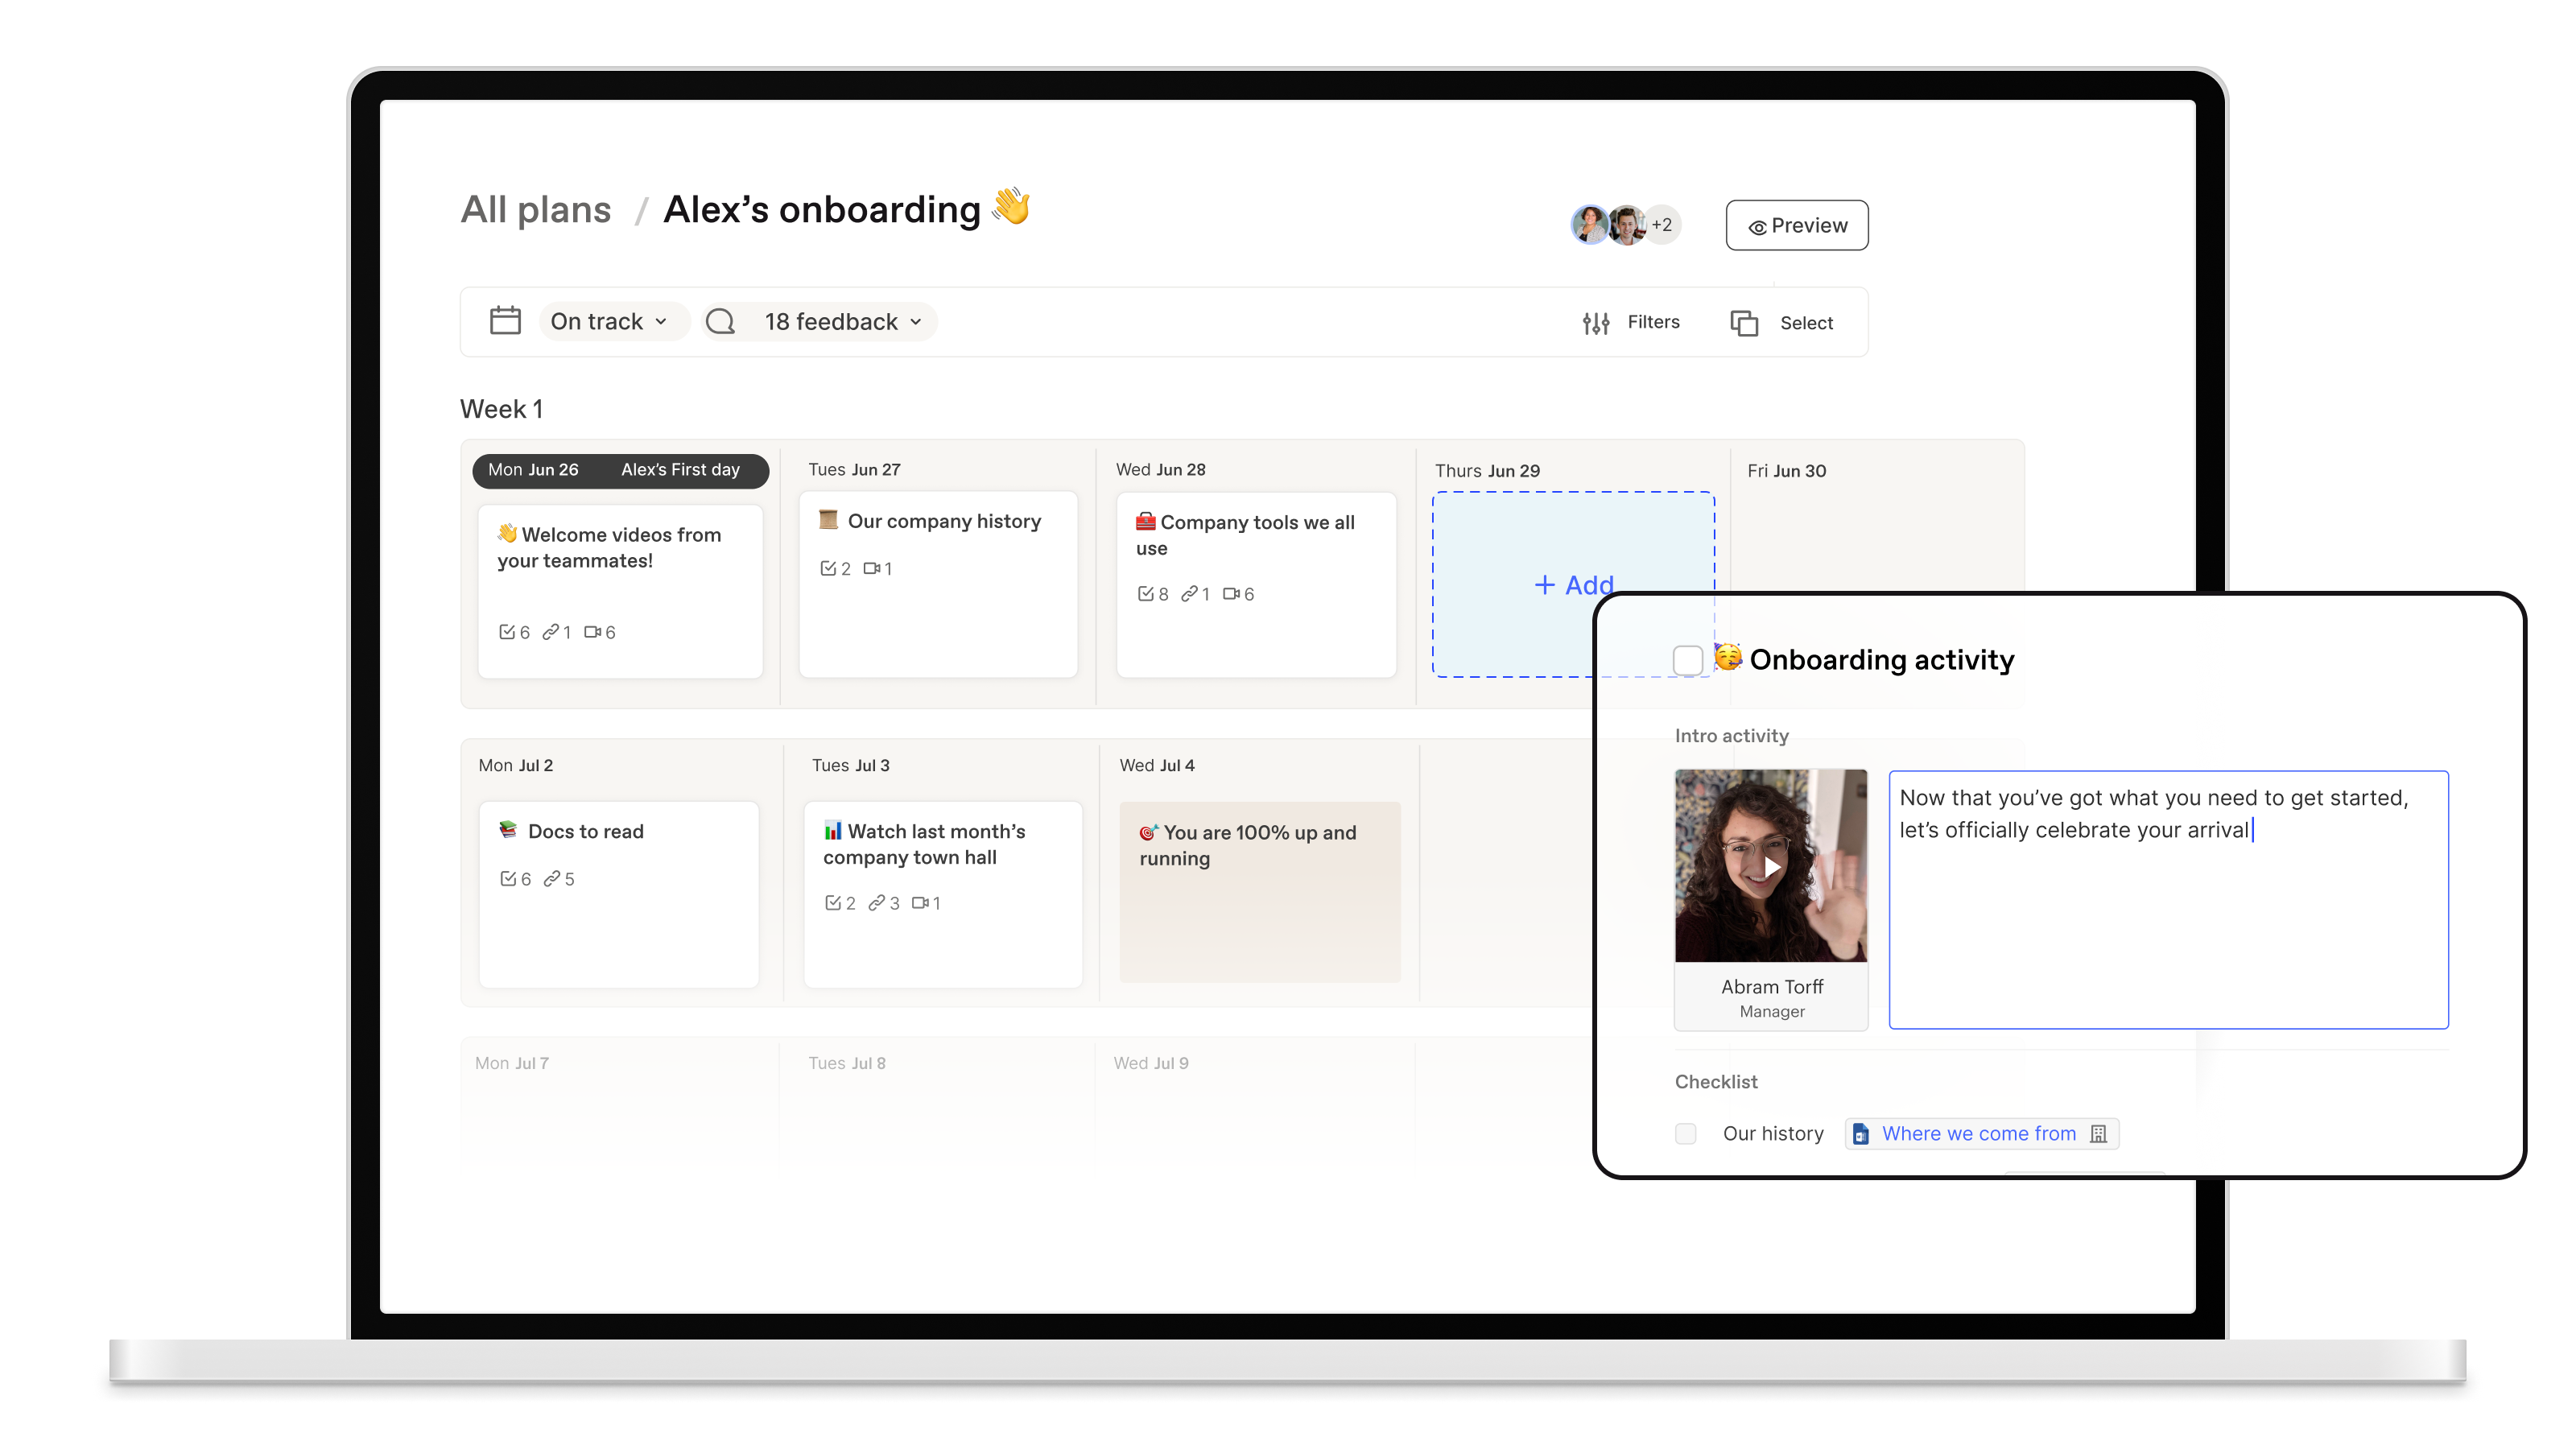 Workleap Onboarding UI interface presenting an onboarding activity and calendar.